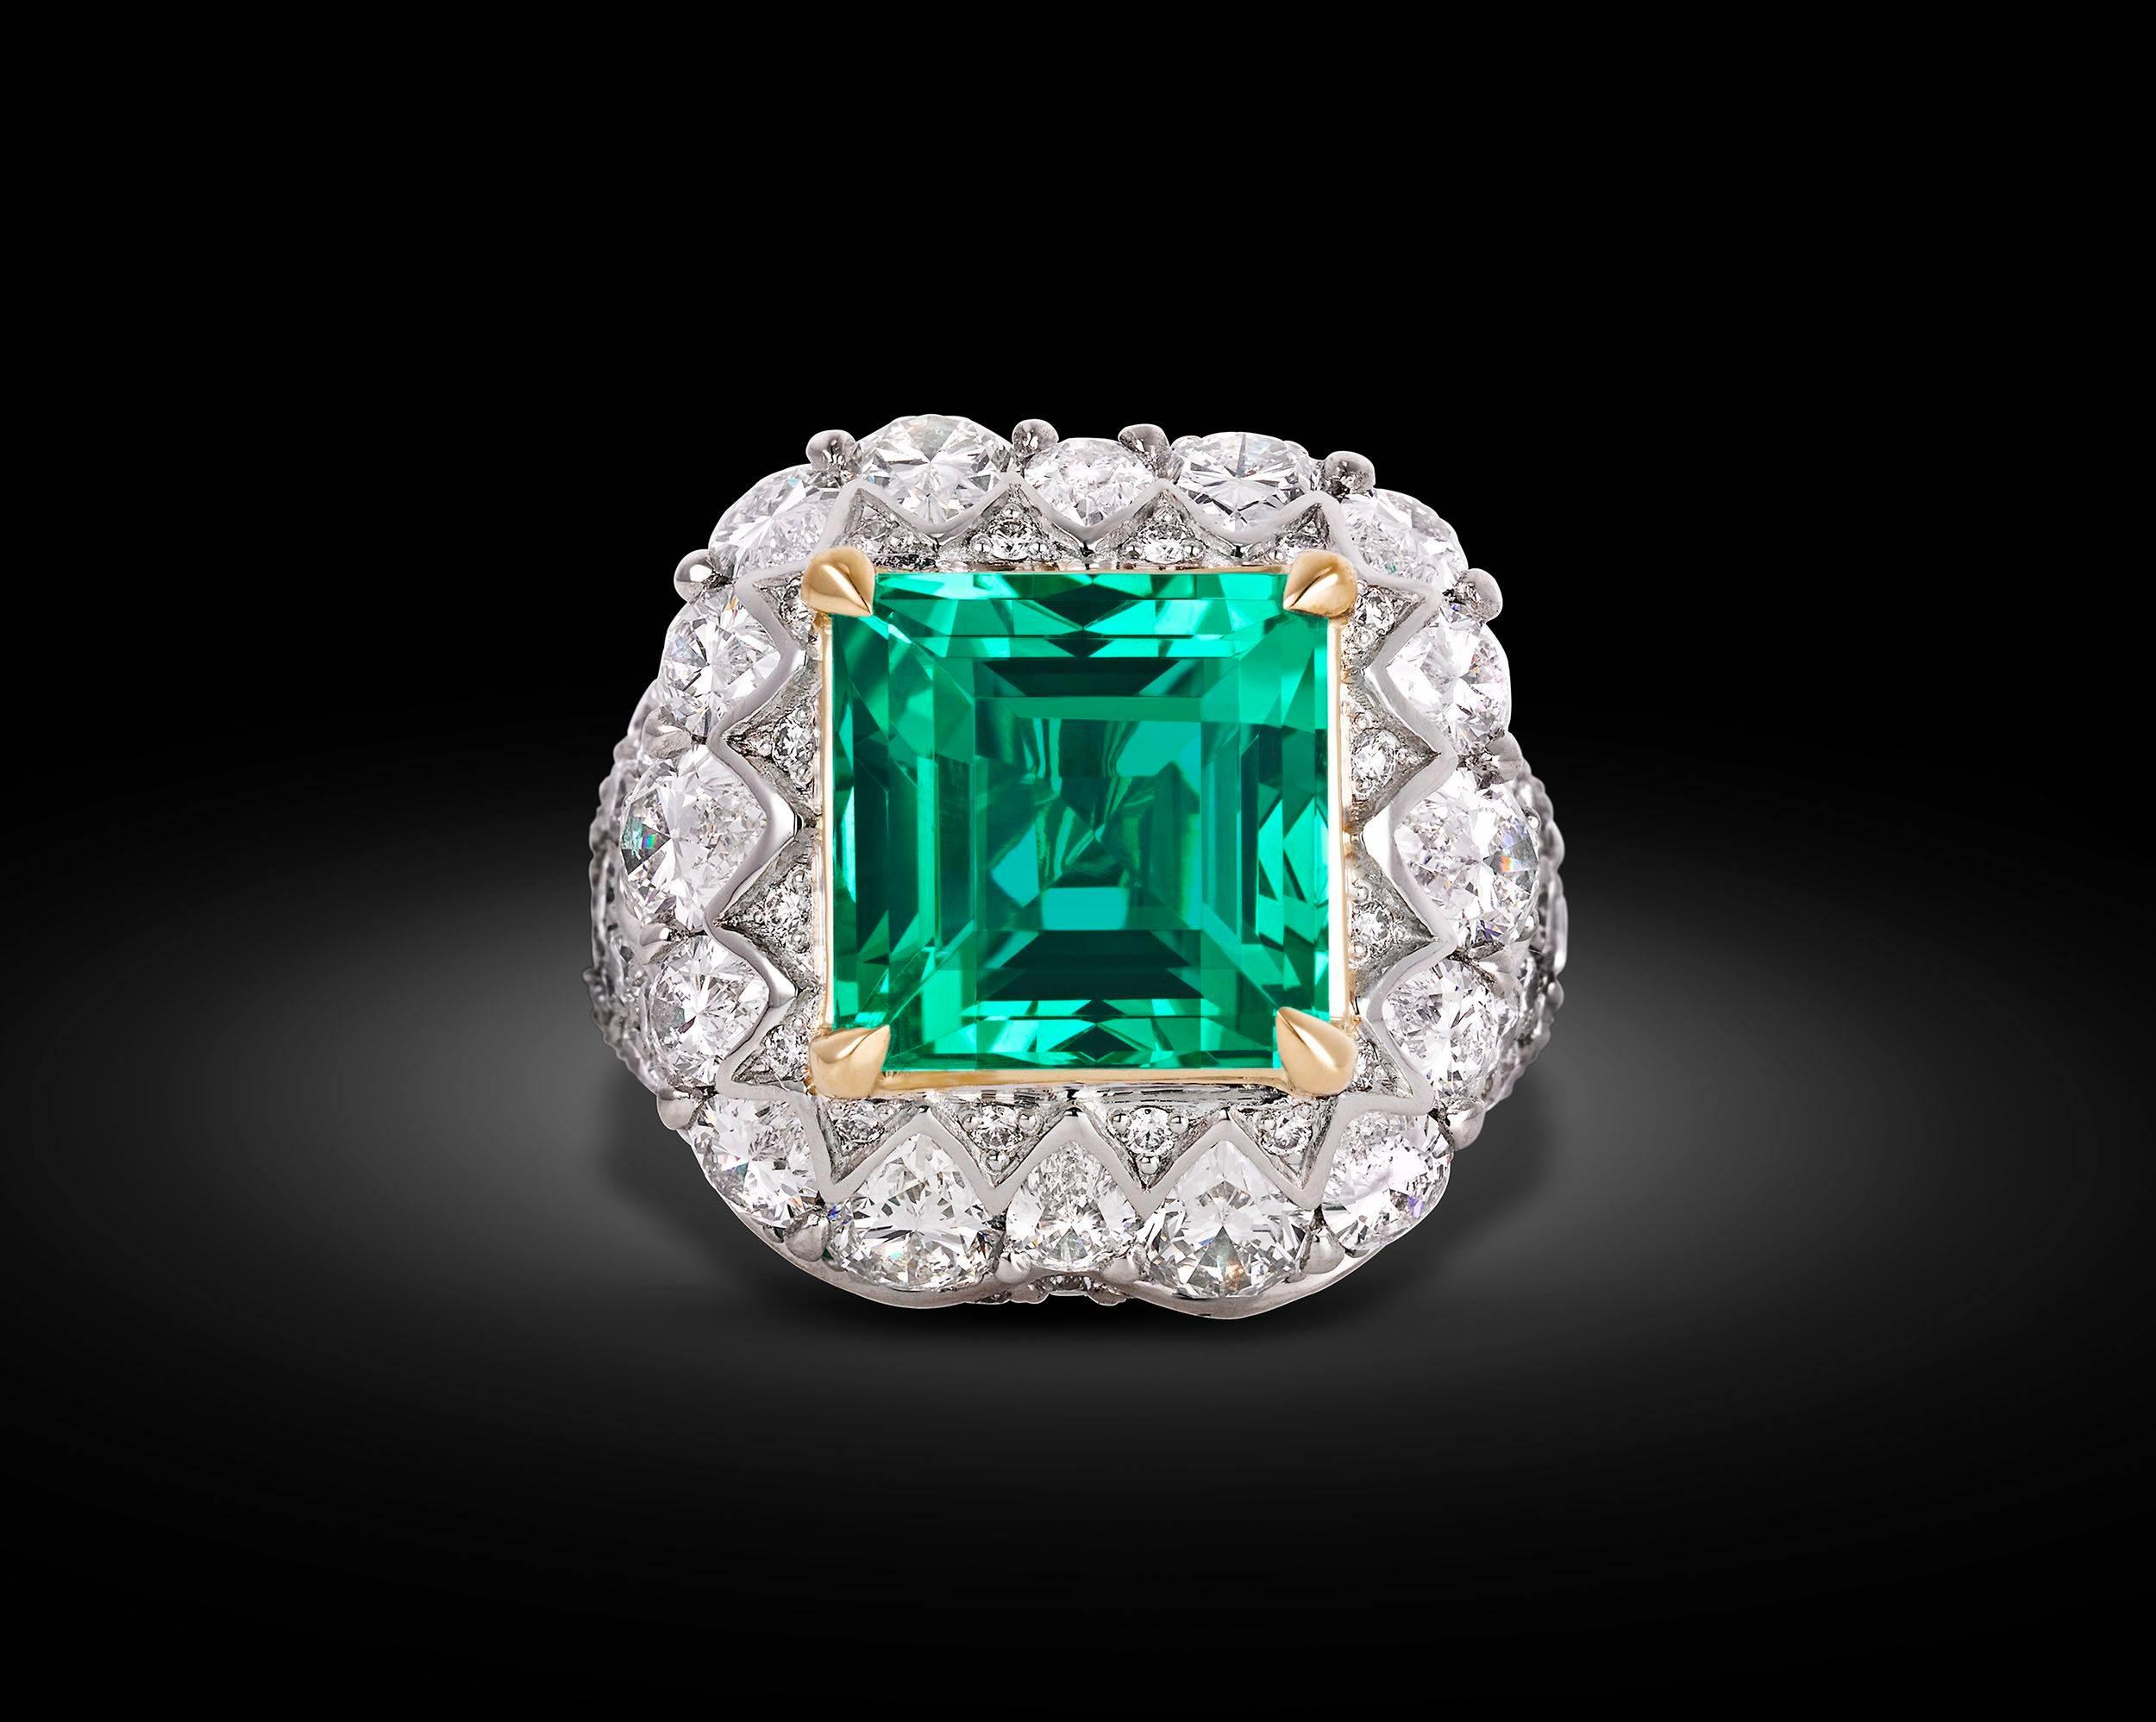 Weighing a dazzling 5.66 carats, this rare untreated Colombian emerald is a beauty beyond compare. Displaying the perfect green hue so coveted in these rare Colombian gemstones, this stone also boasts a clarity that far surpasses other emeralds. To